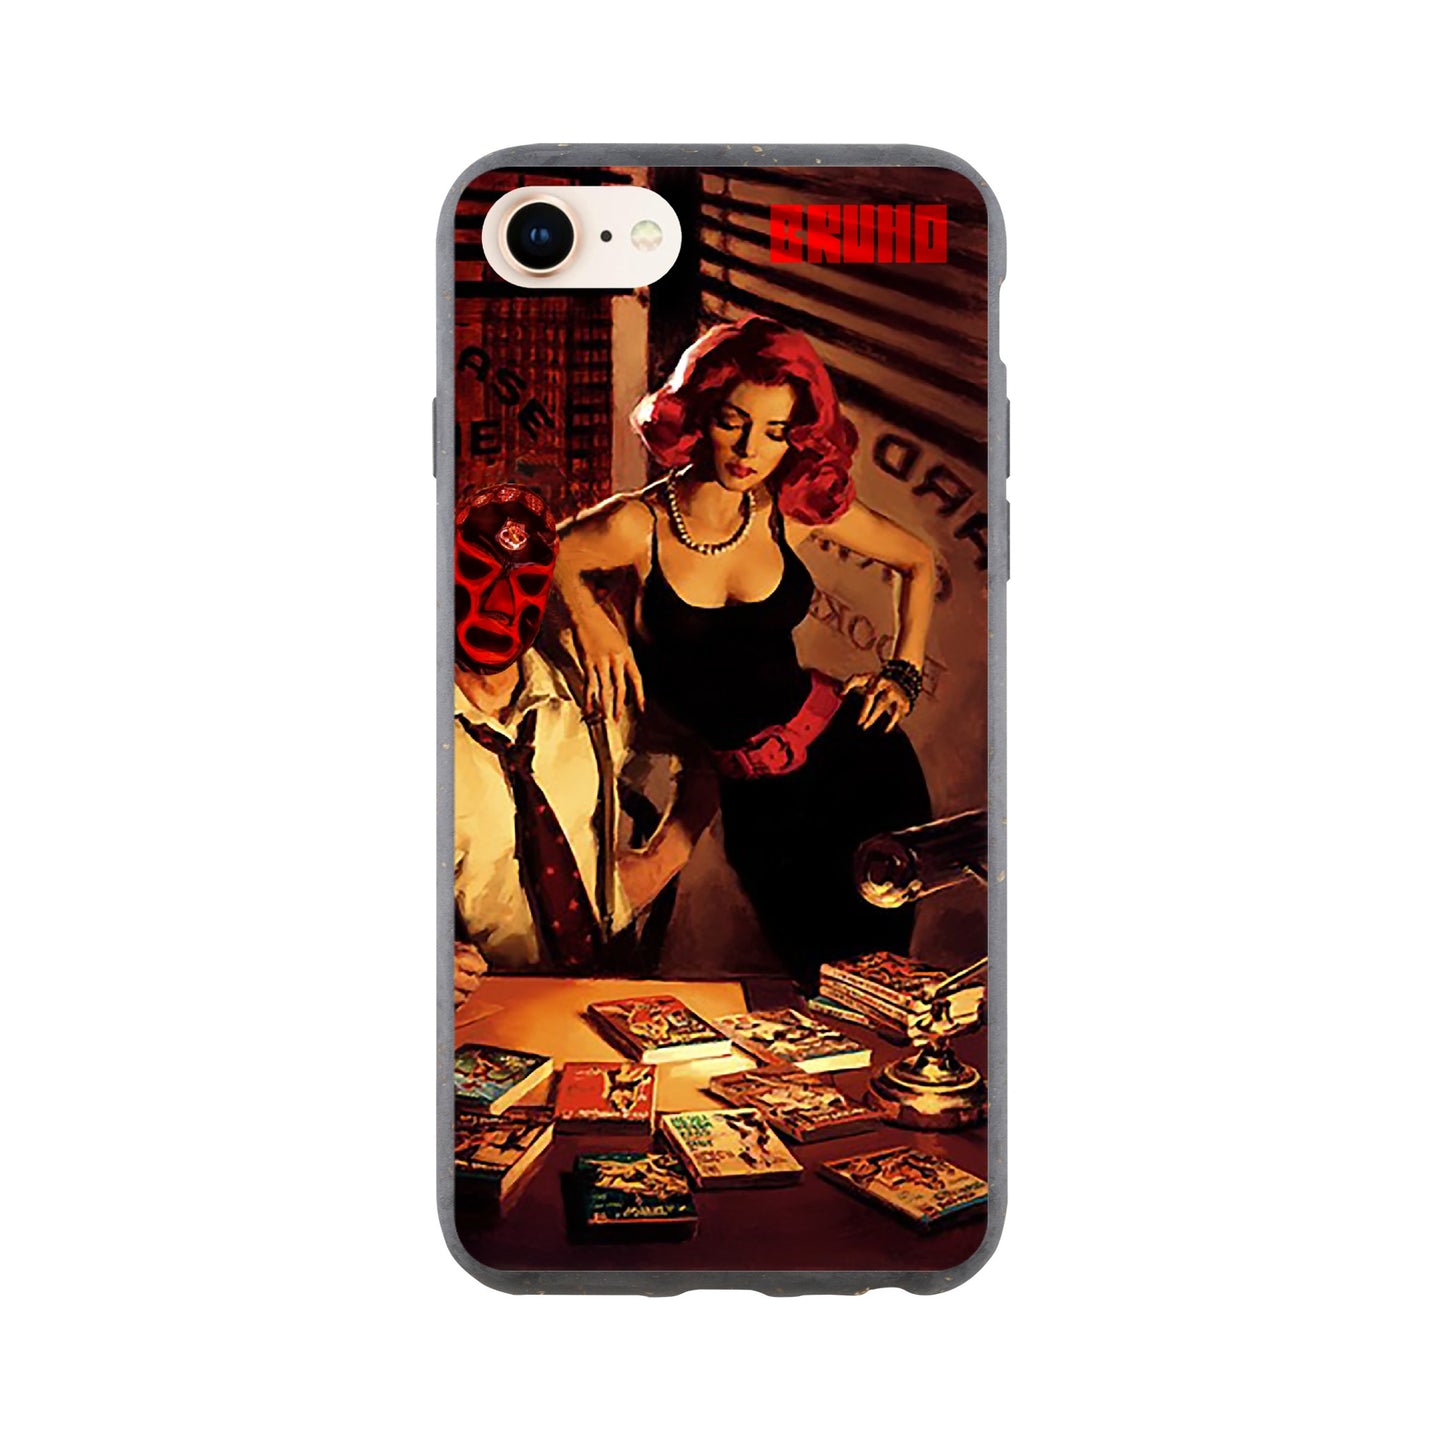 Bookseller Bruho iPhone Case